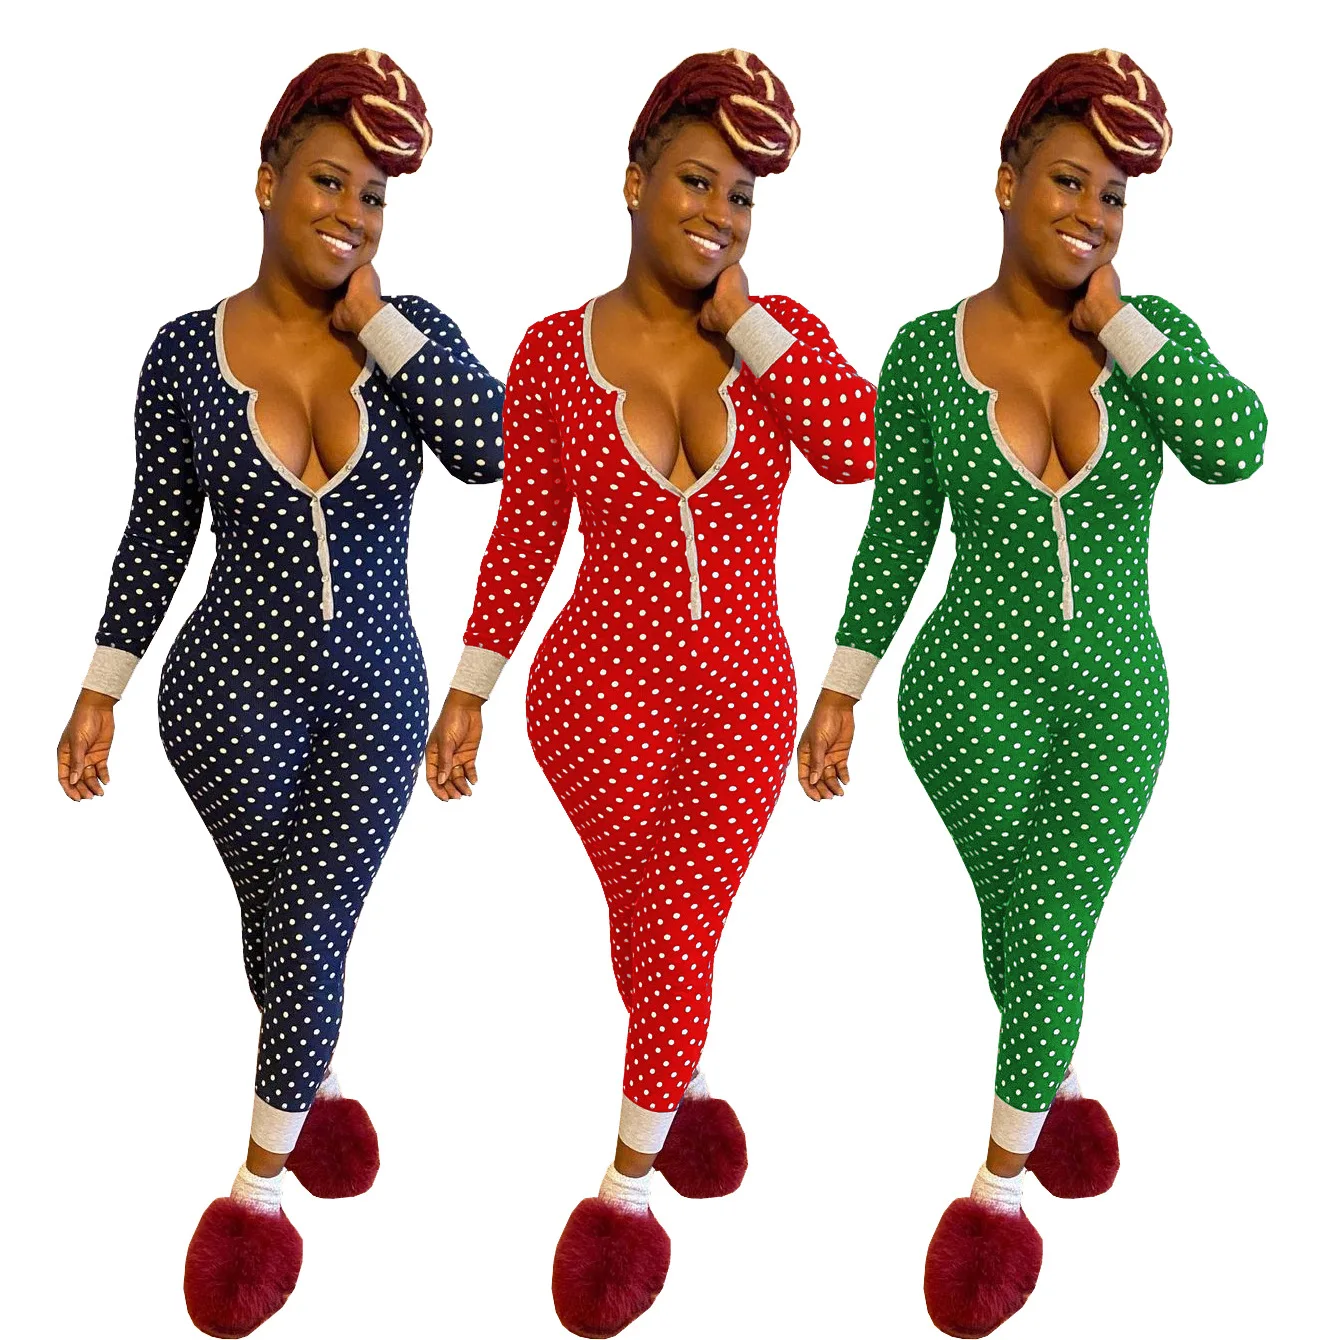 

wholesale fall Winter New Casual Cute printed pajama onesie womens long sleeve button Polka dot pajamas onesie for adults women, Colors,cute printed pajama rompers for women